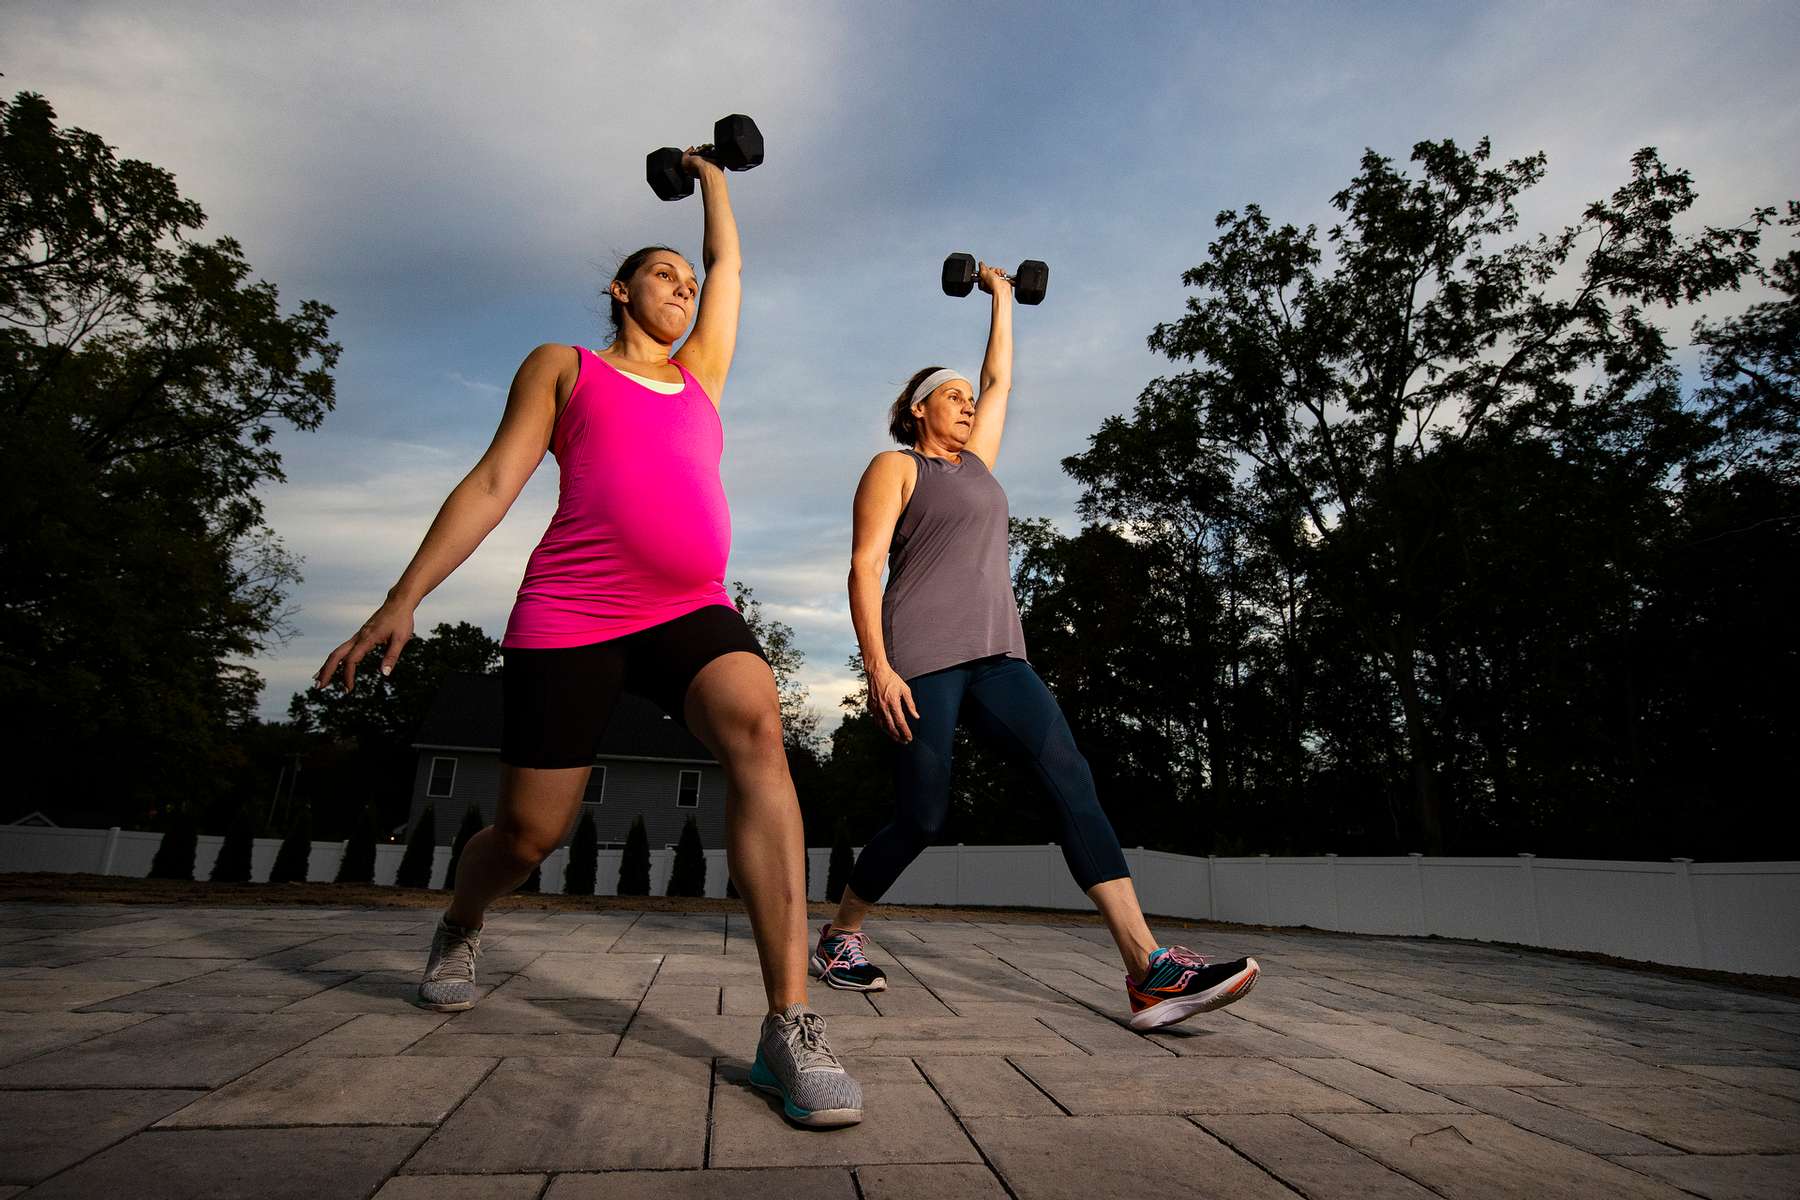 CrossFit athlete Katie Devantier Prabhu trains with her Mother Paula Devantier at her home during a Life Outside the Box (LOTB) virtual Zoom training class  on September 21, 2021 in Niskayuna, New York.  Katie is 7 1/2 months pregnant with twins and continues to train with the LOTB program.  She is due to give birth in November to a boy and girl. 